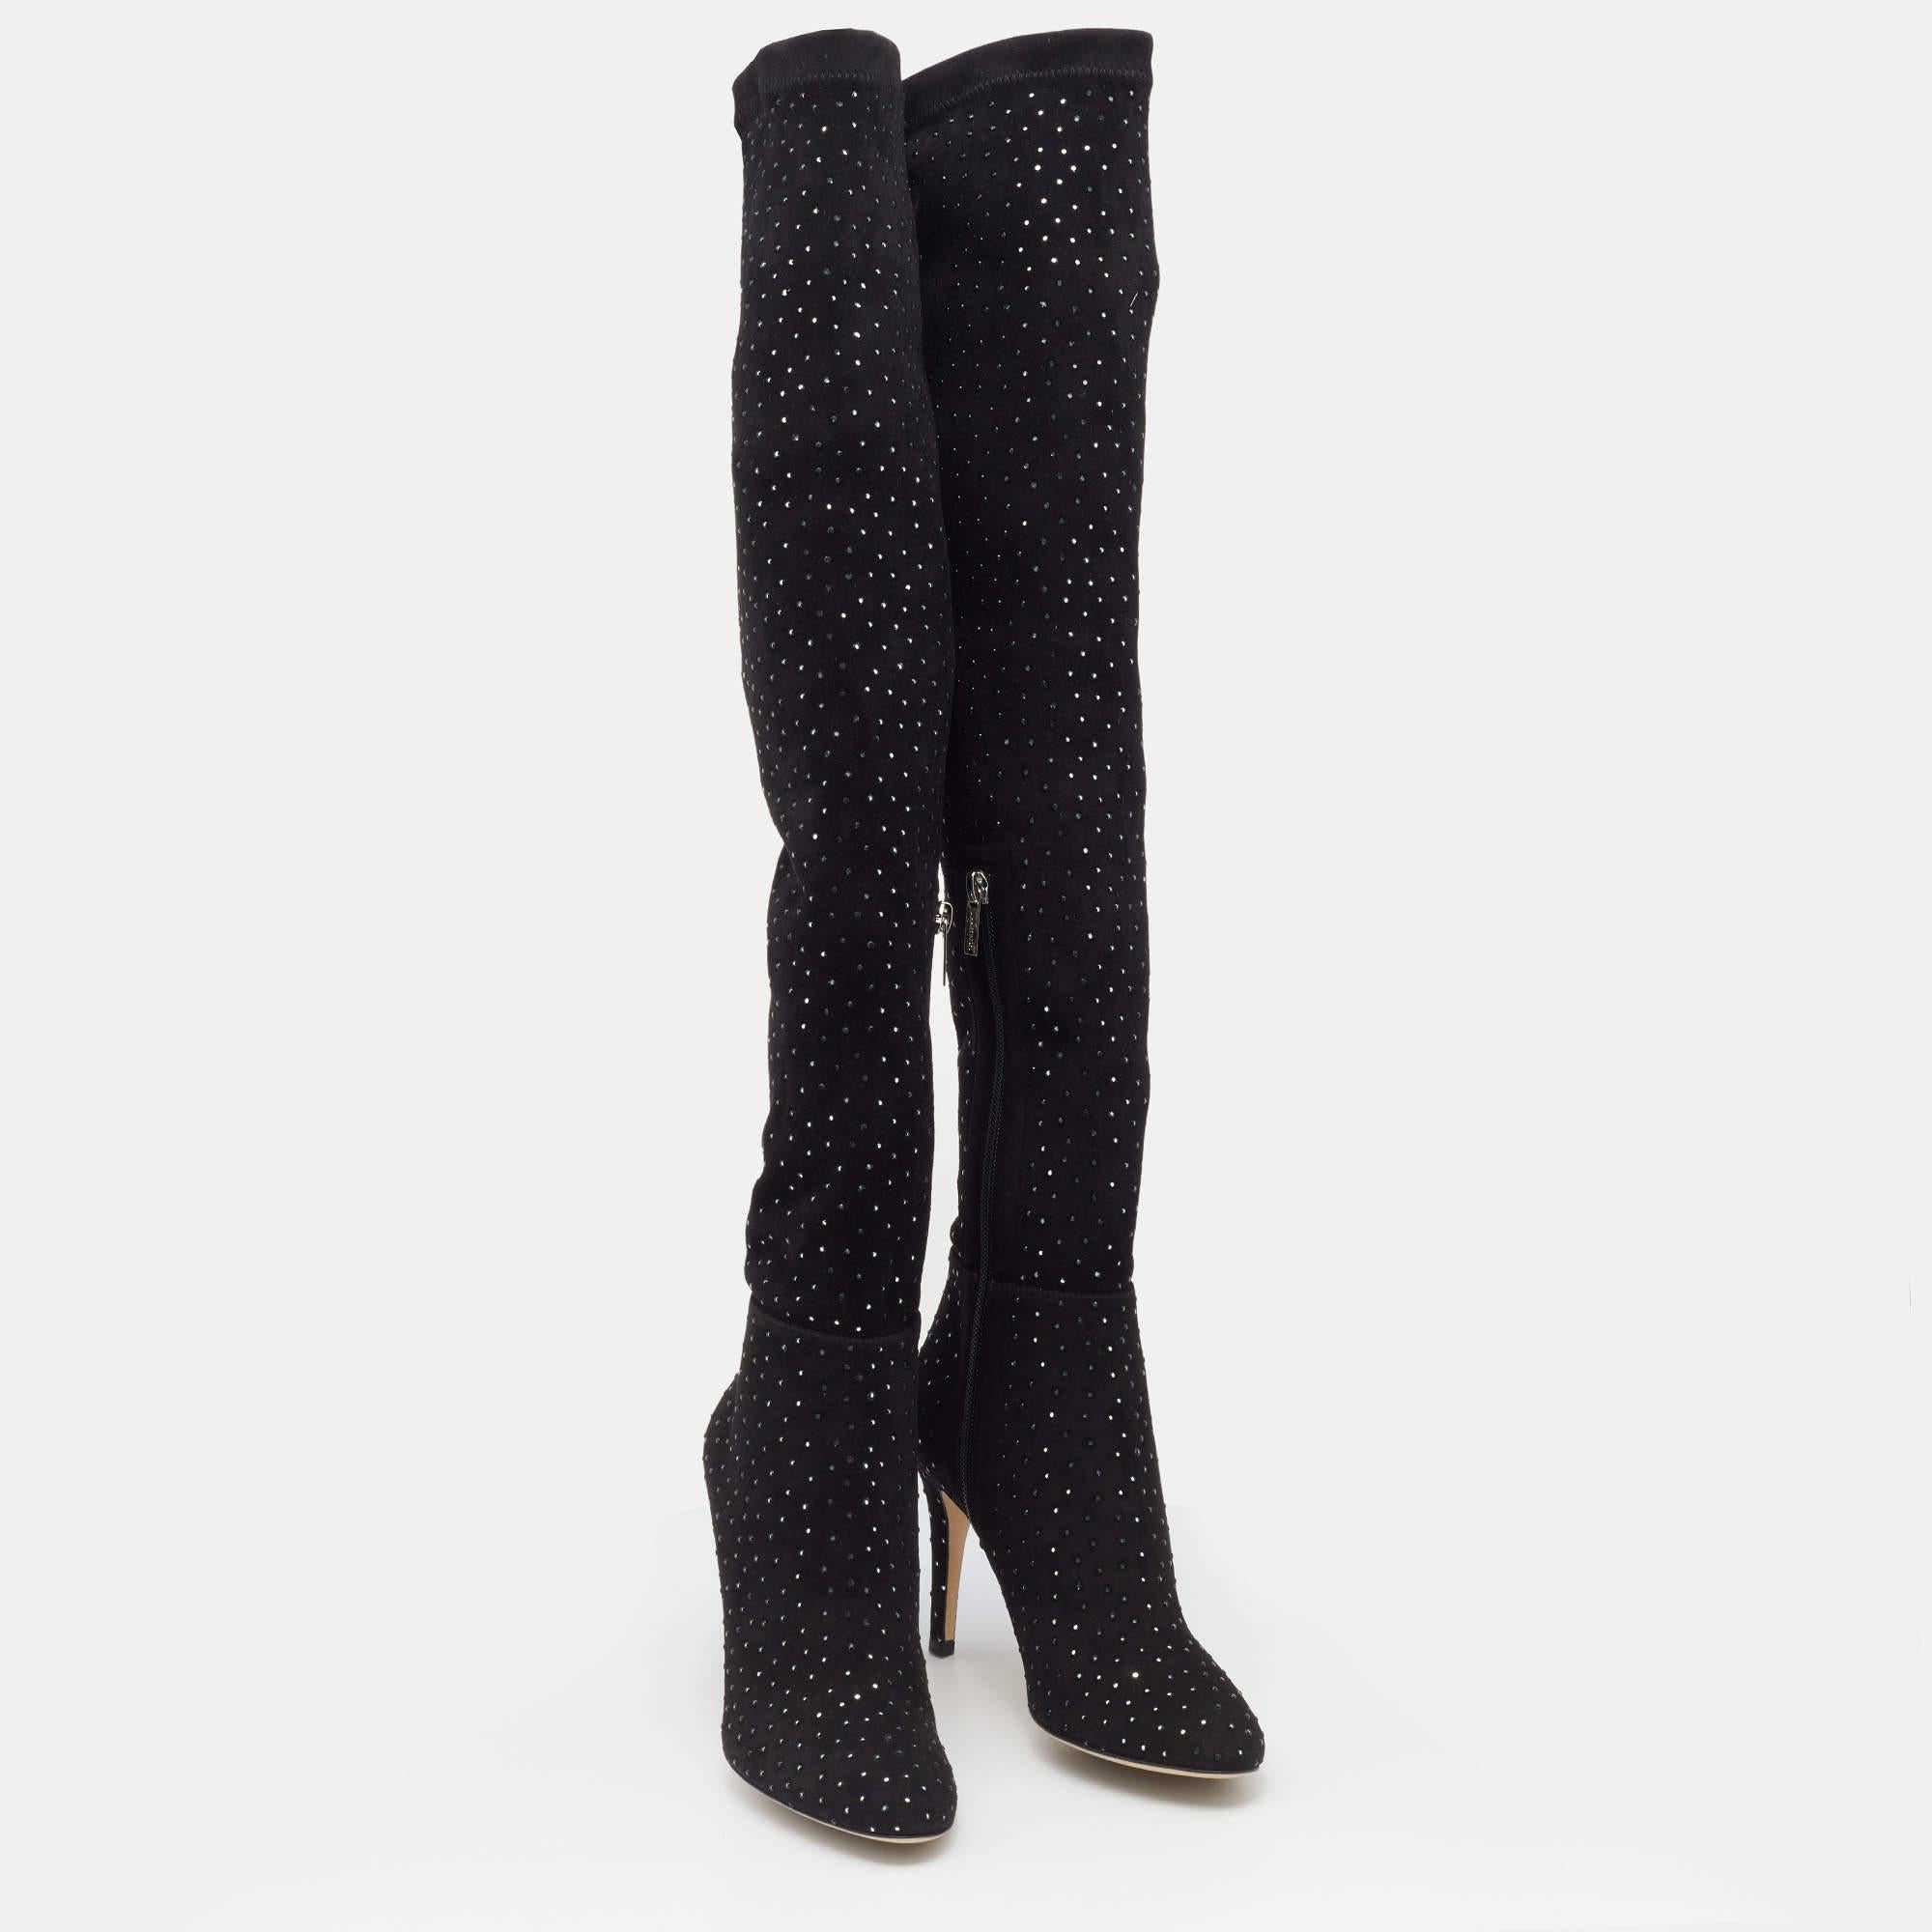 Jimmy Choo brings you this fabulous pair of thigh-high boots that will give you confidence and loads of style. The shoes have been crafted from stretch fabric in a classy black shade and styled with embellishments and 9 cm heels.

includes
Original